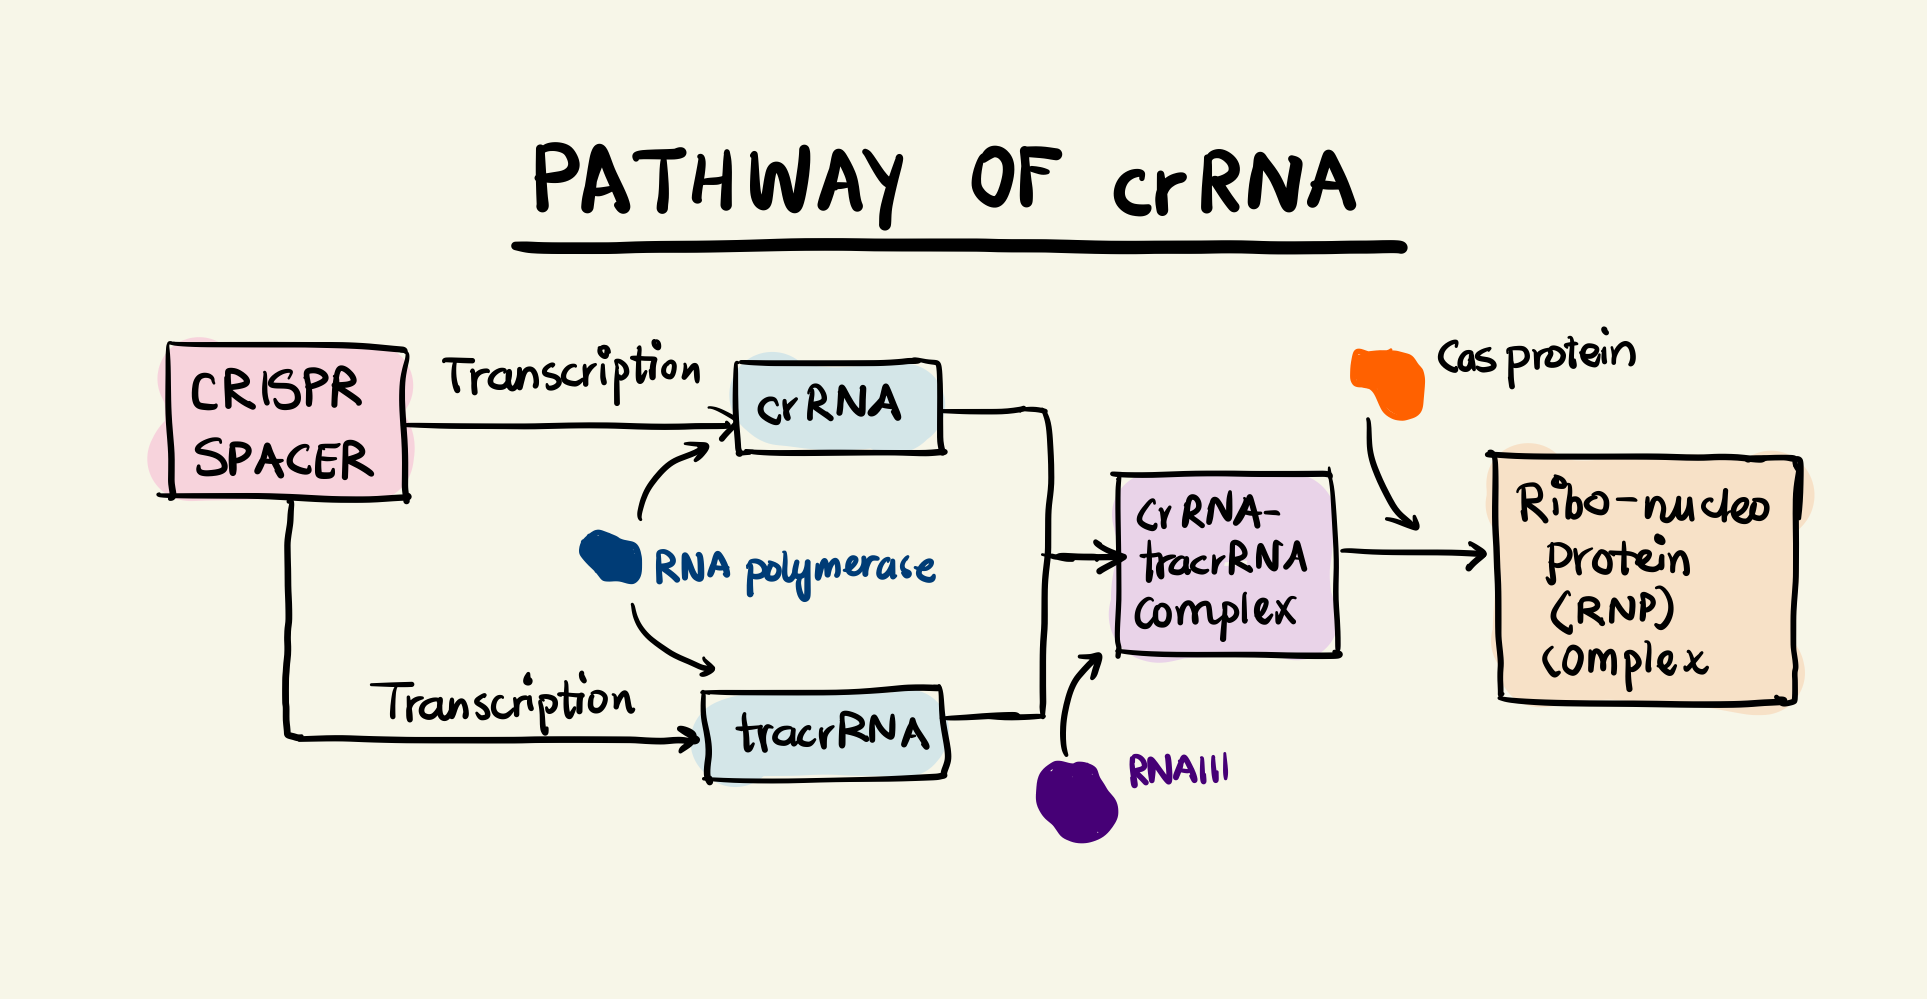 Block diagram showing the pathway of the crRNA